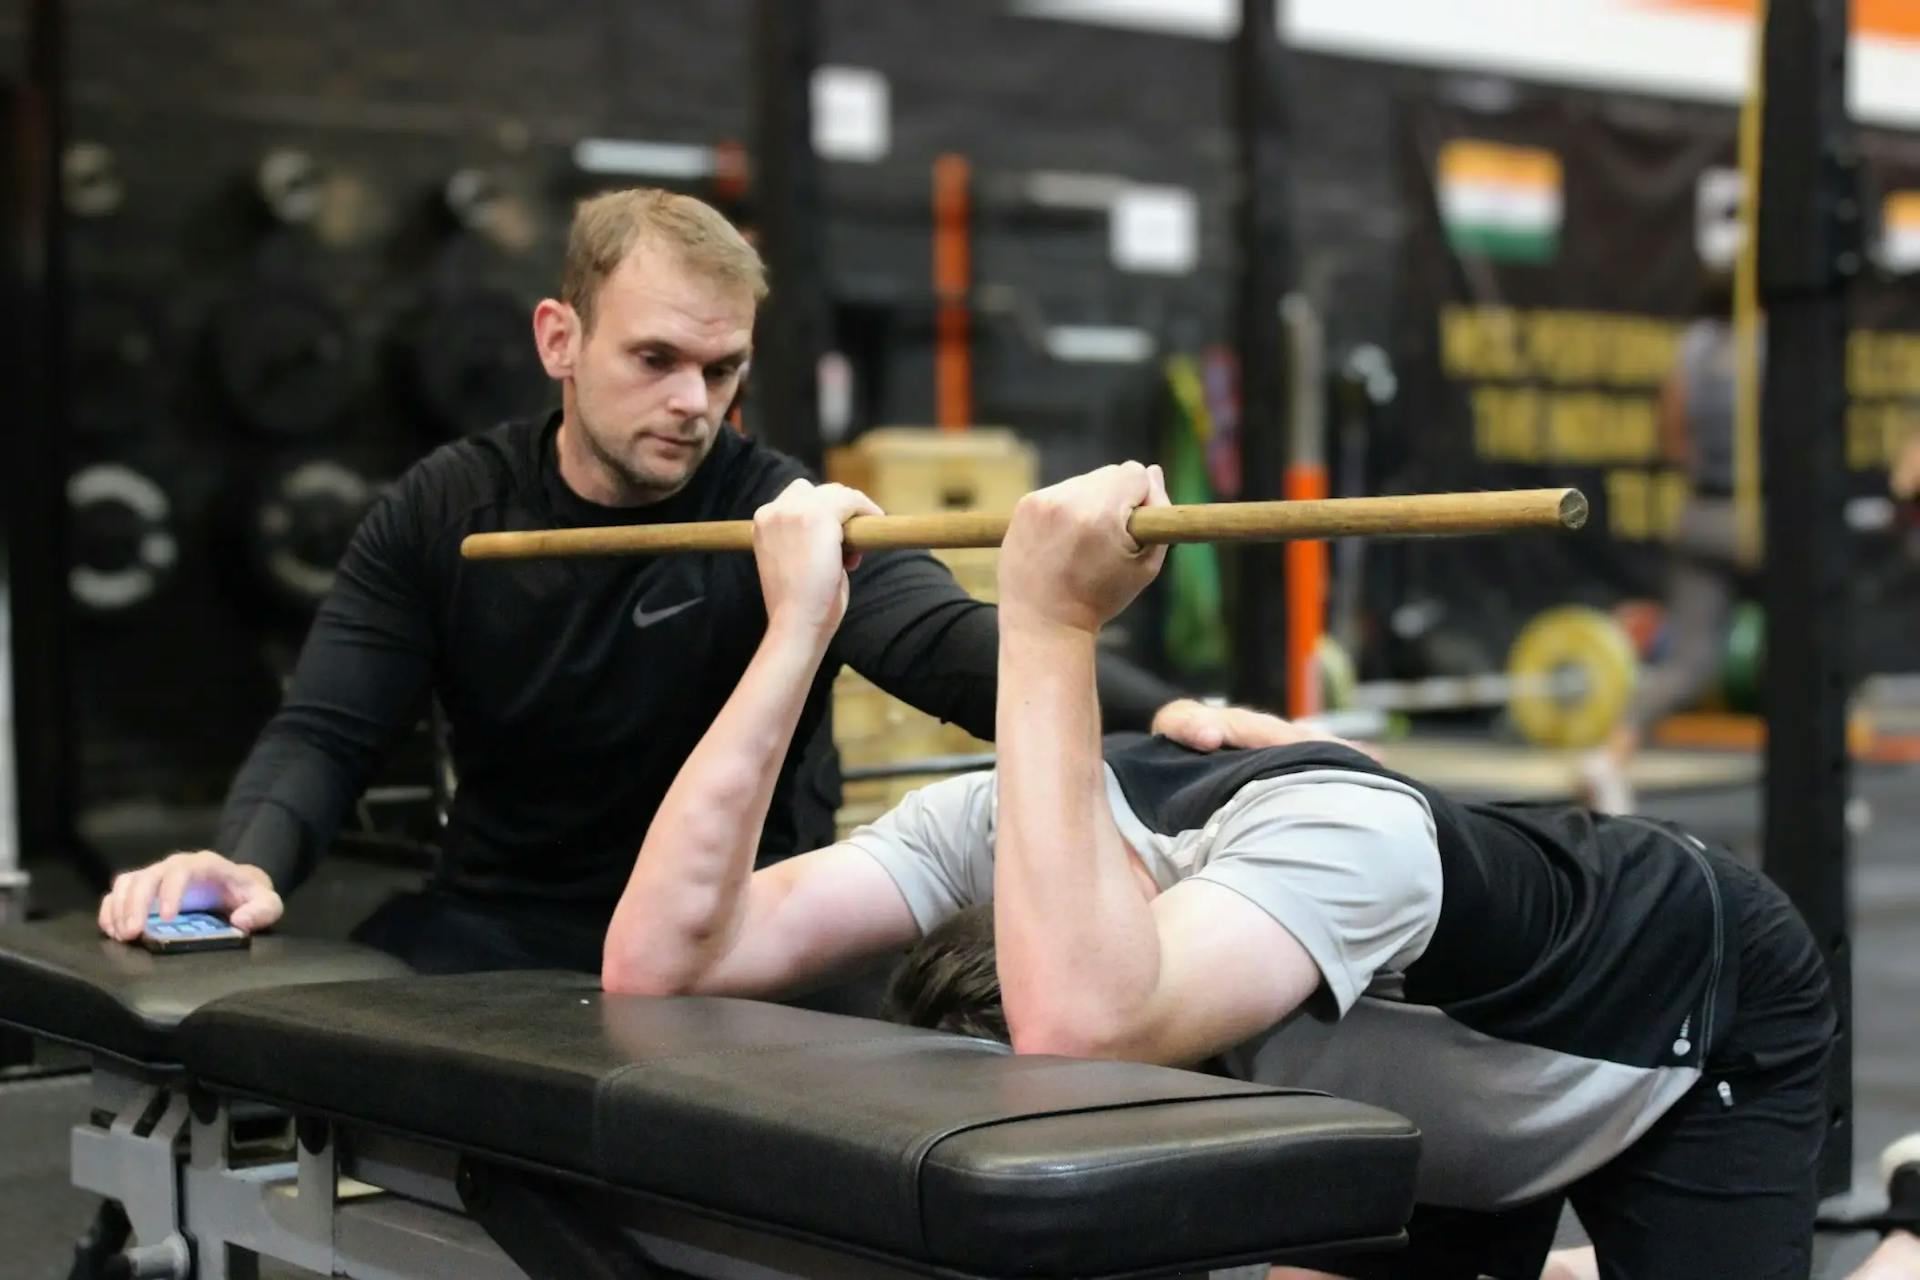 Chris watching a client perform a lat stretch on a bench